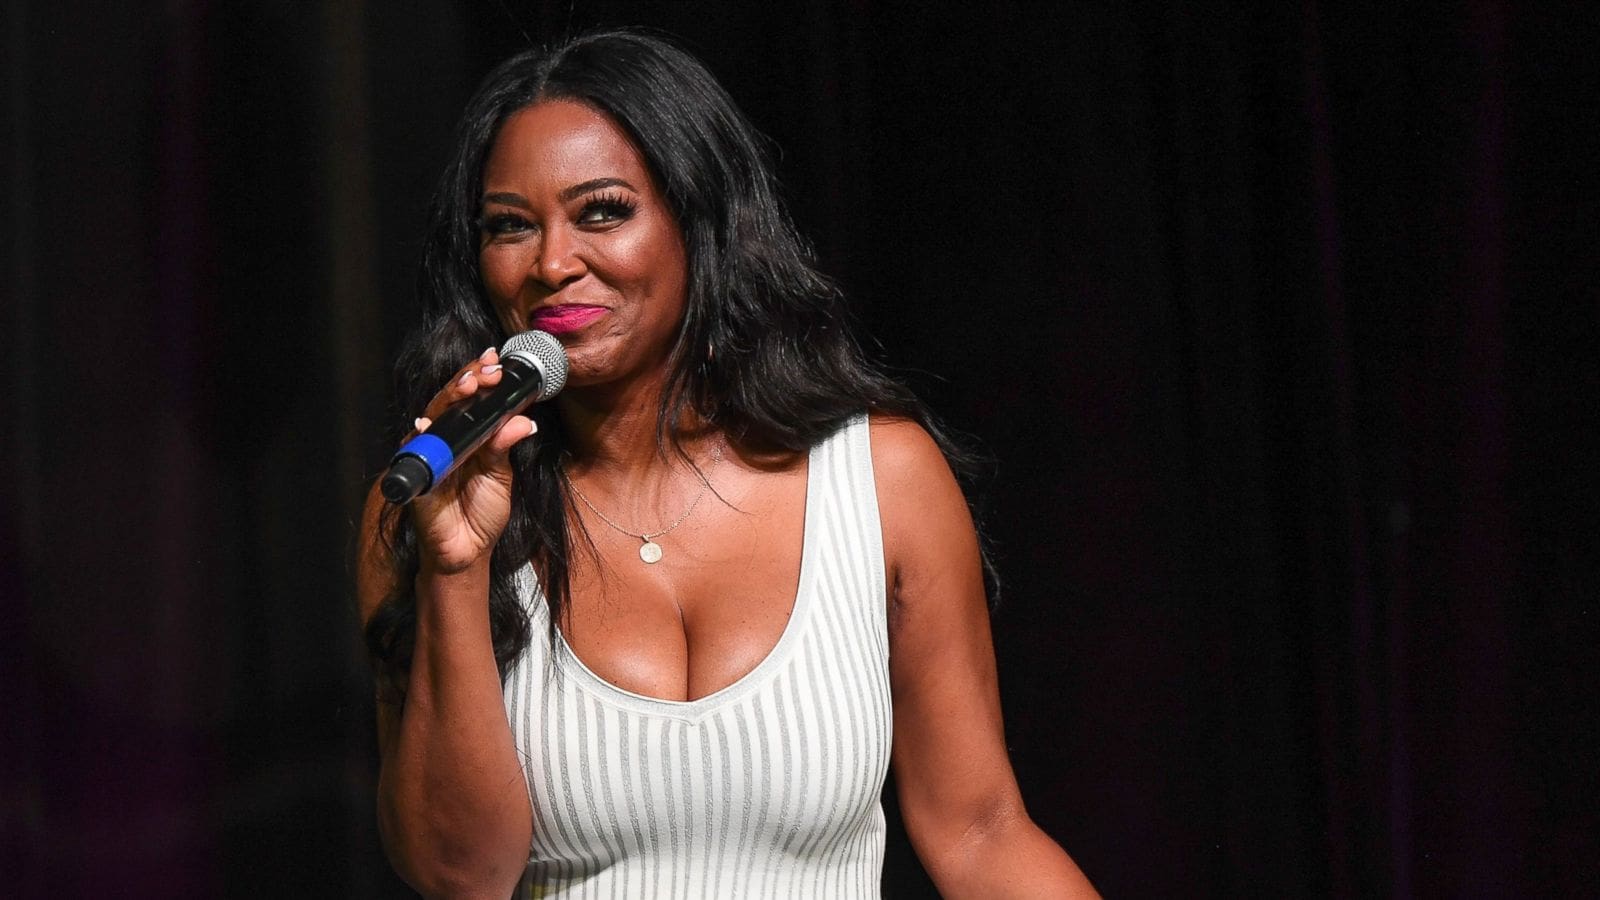 Kenya Moore Publicly Proclaims Her Love For Cynthia Bailey Following The Wedding